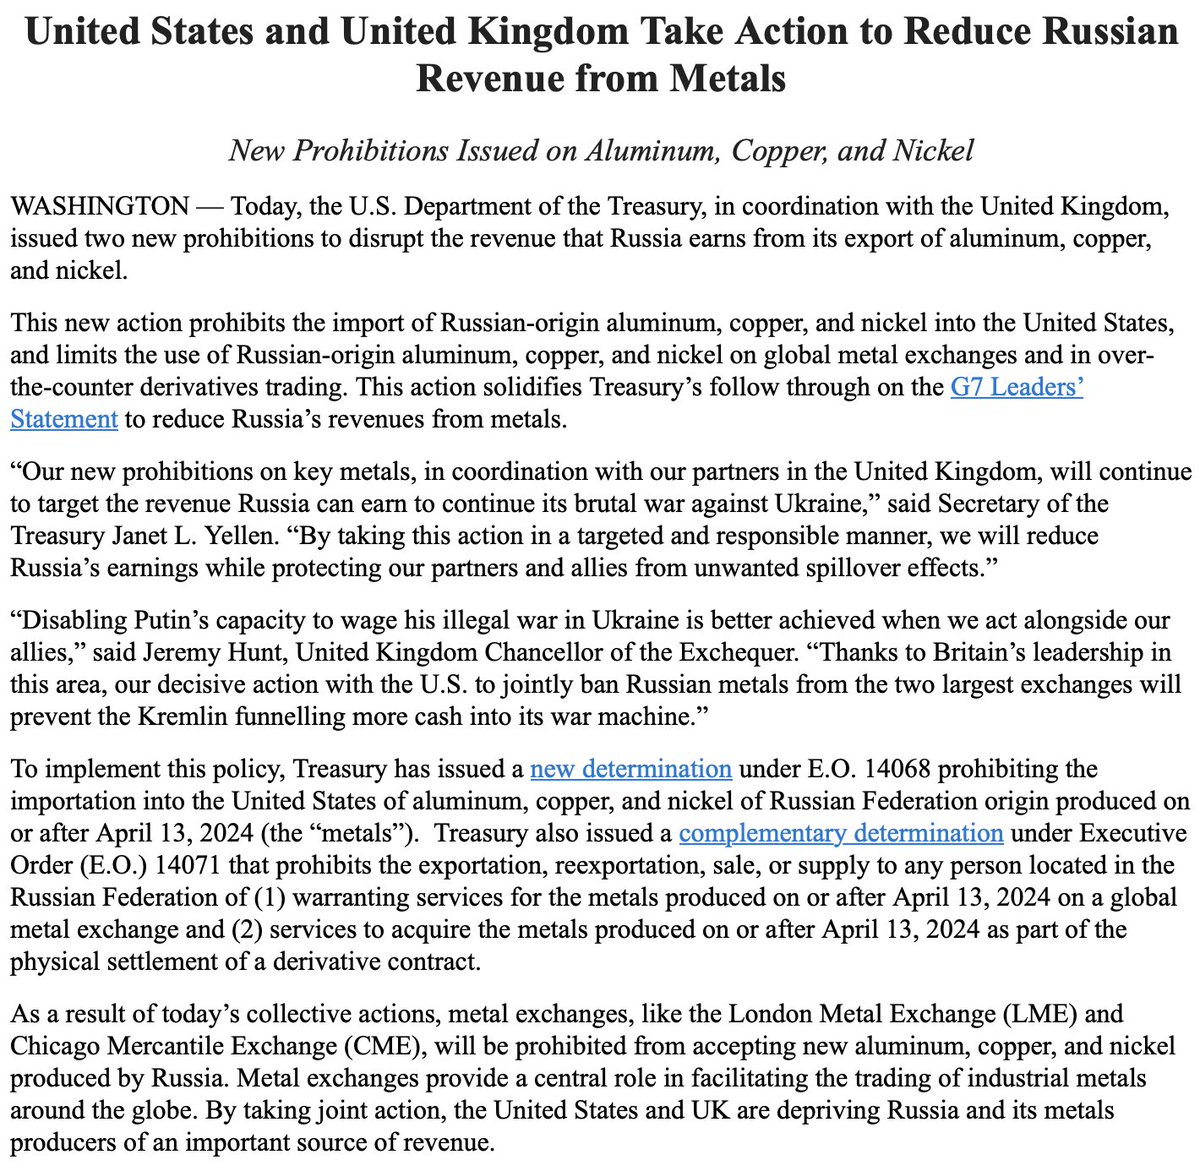 US, Britain restricted Russian metal exports, -   @USTreasury, British officials issue new prohibitions against Russian-origin aluminum, copper and nickel